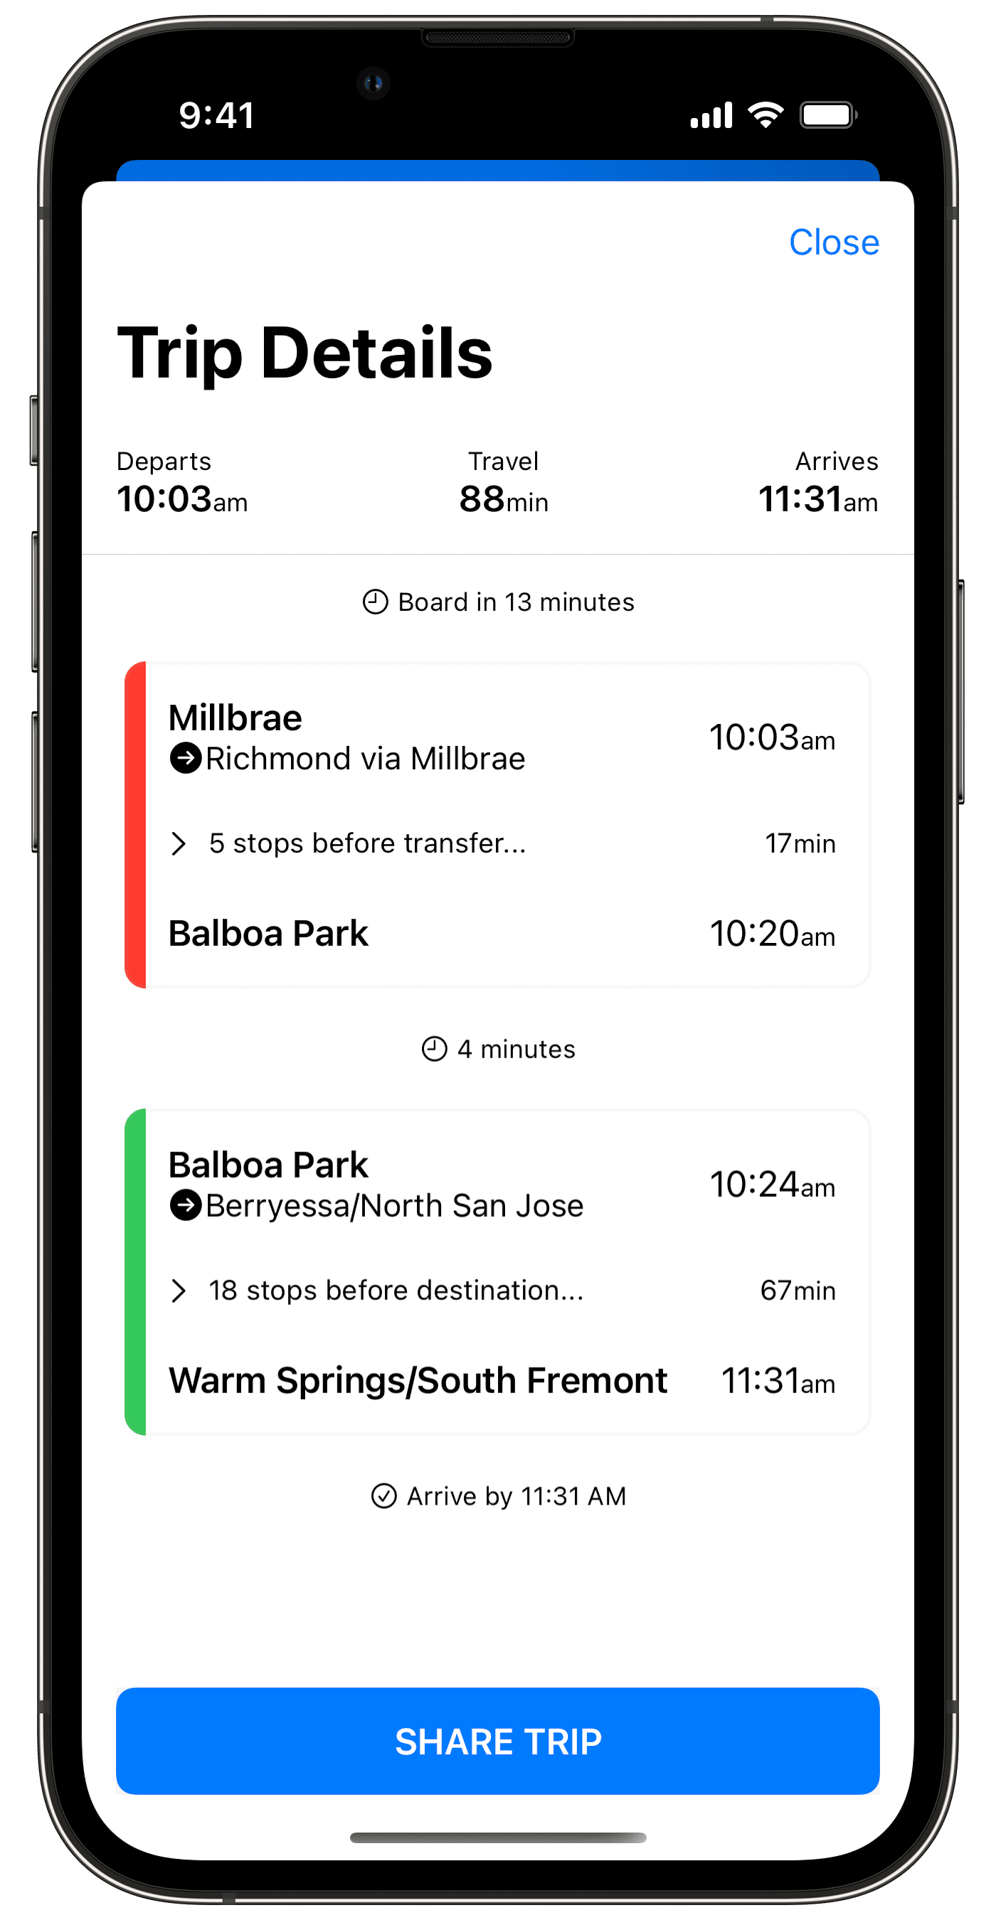 Trip detail screen of the Arrival BART app. The screen shows transfer times and windows.